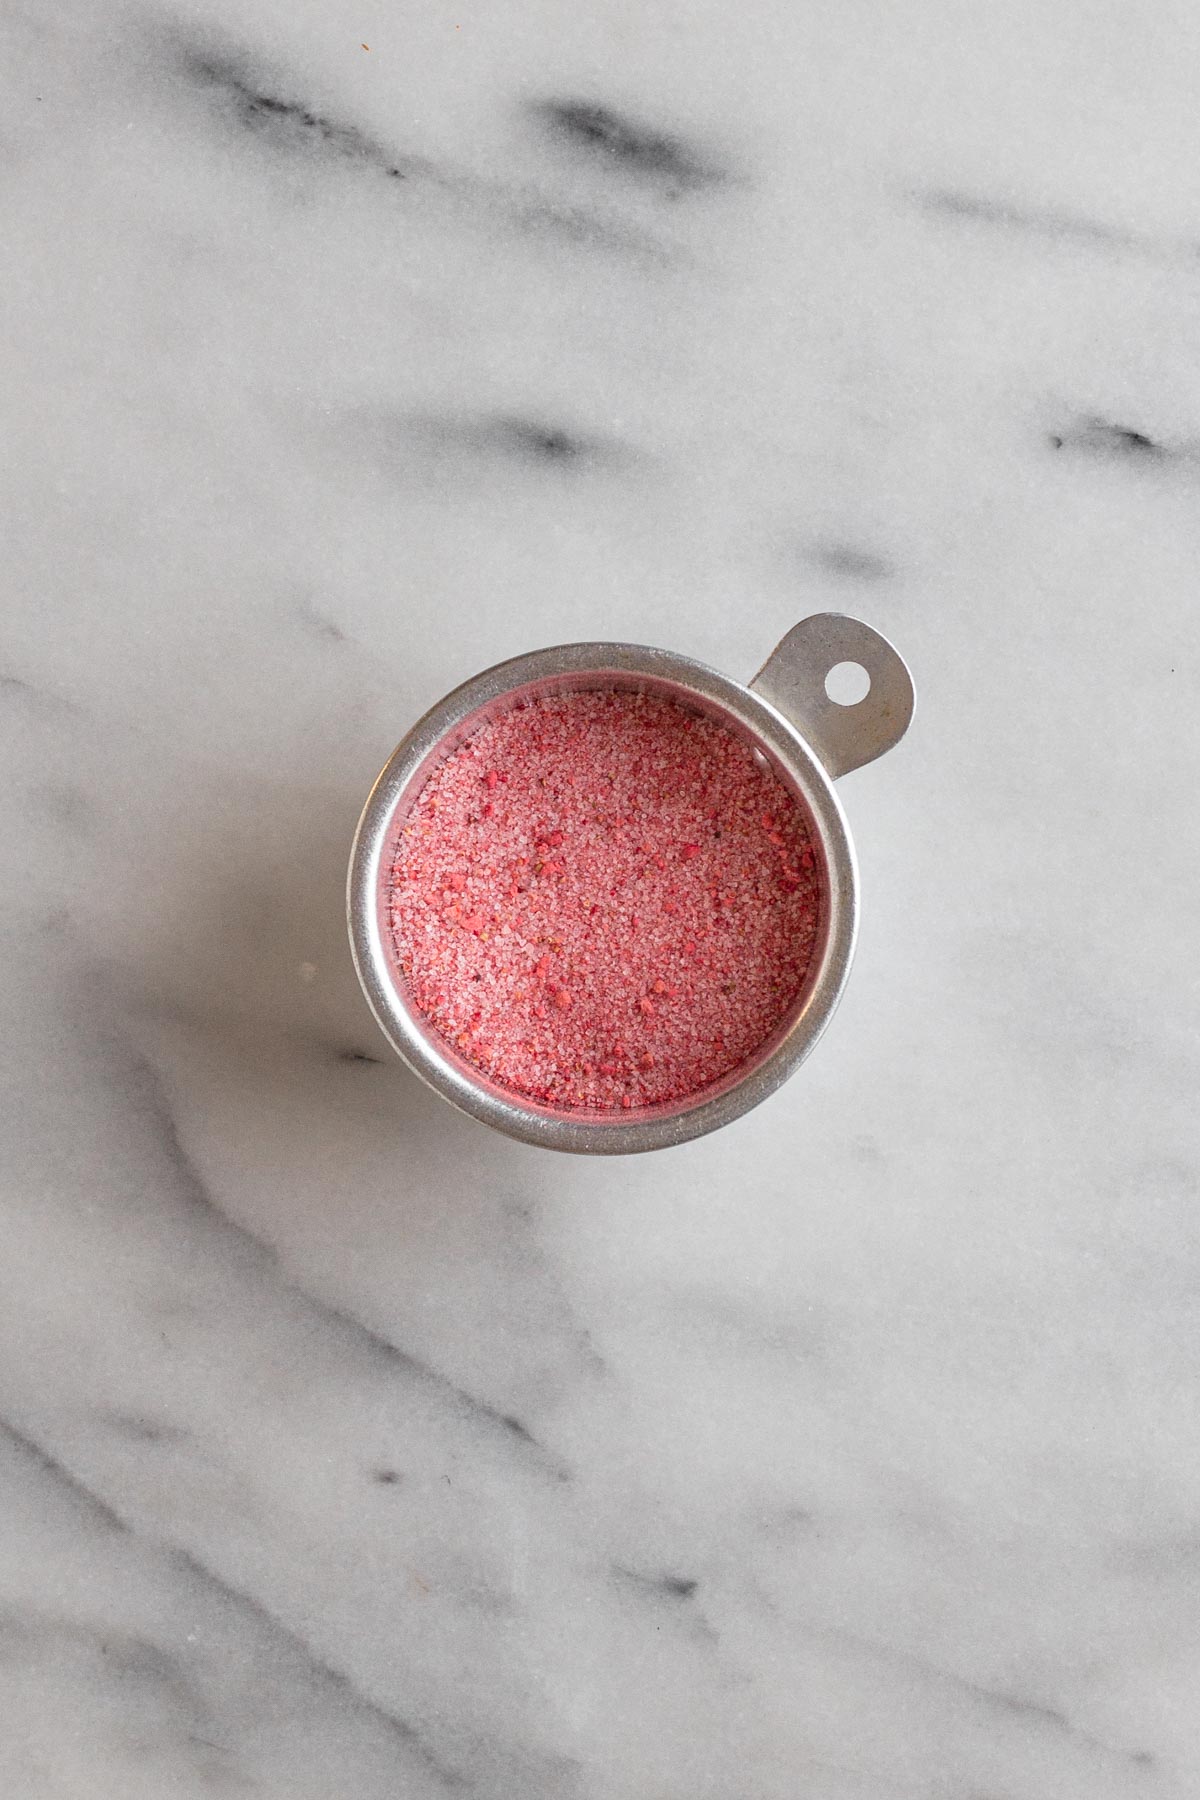 sugar and powdered freeze-dried strawberries in a metal cup